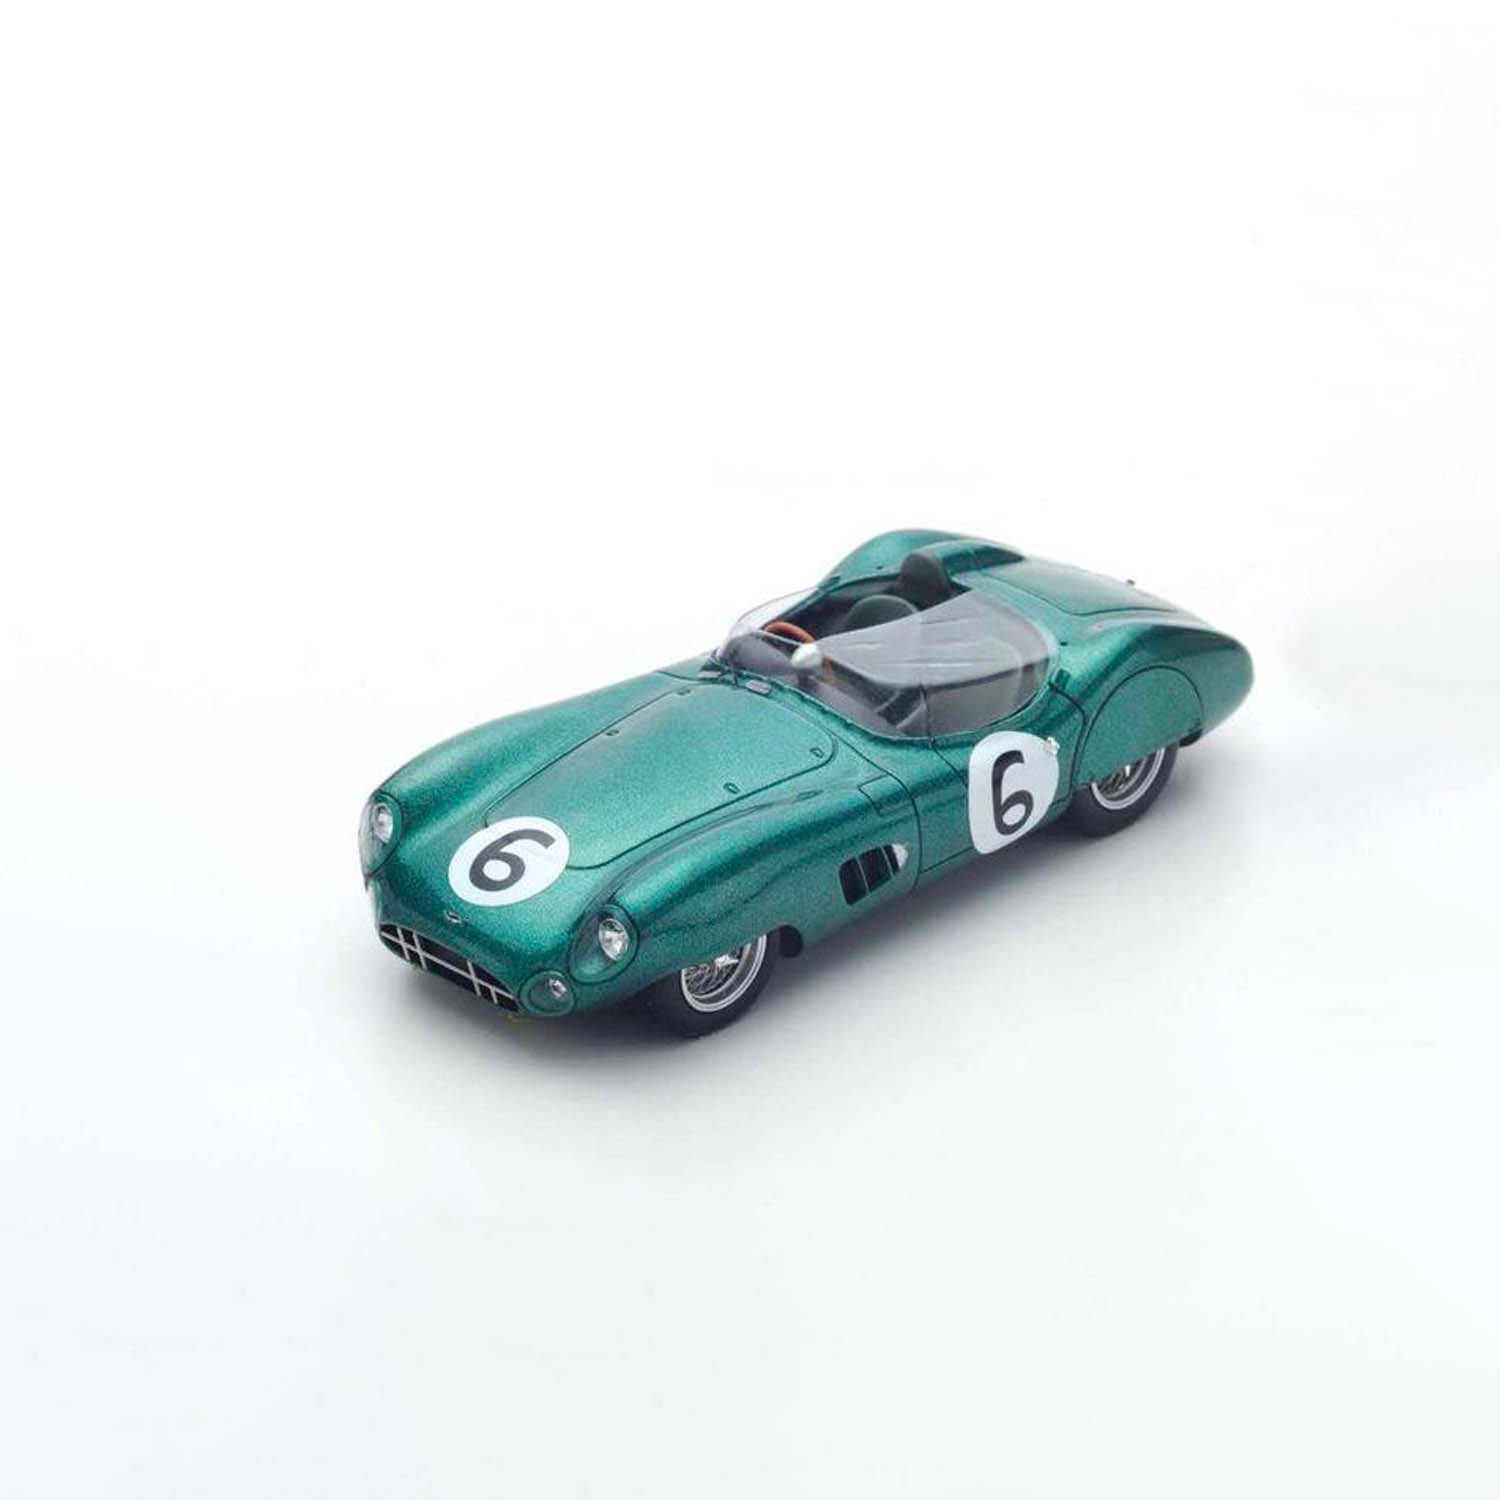 Aston Martin DBR1 2nd 24H Le Mans 1959 | 1:43 Scale Model-1:43 Scale Model-Spark Models-gpx-store